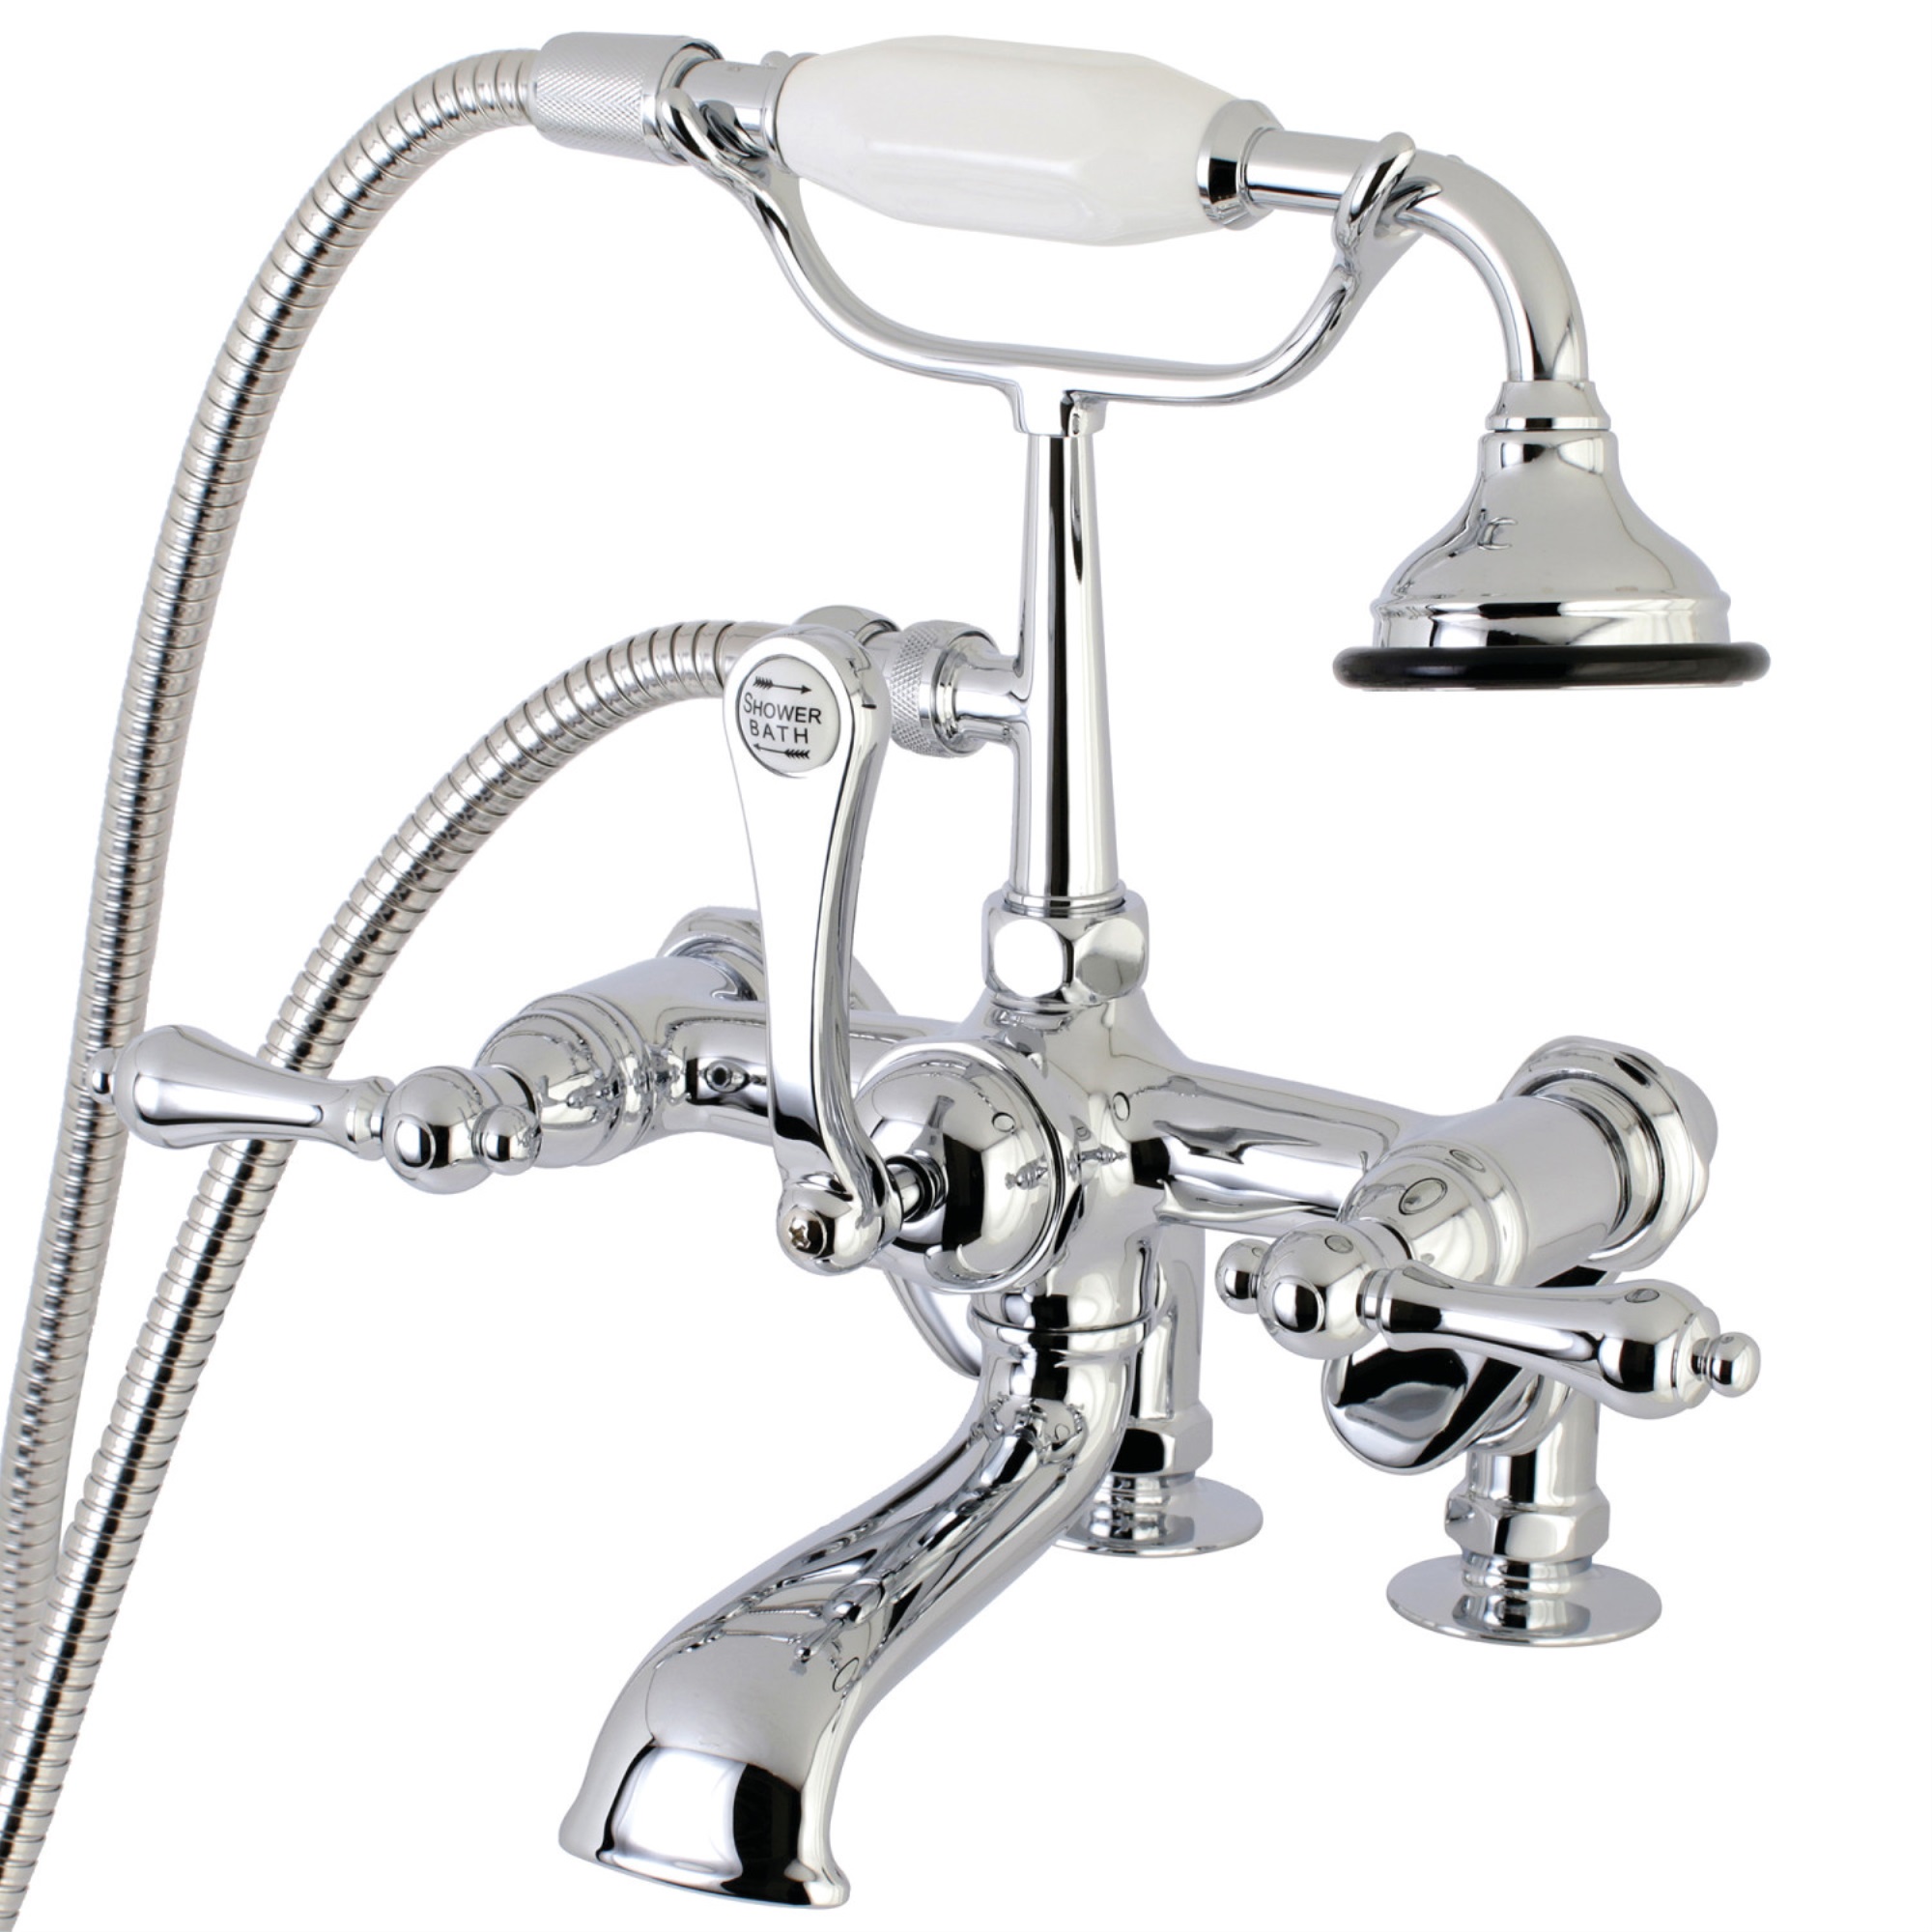 Aqua Vintage Kingston Brass AE652T1 Auqa Vintage 7-inch Adjustable Clawfoot Tub Faucet with Hand Shower, Polished Chrome